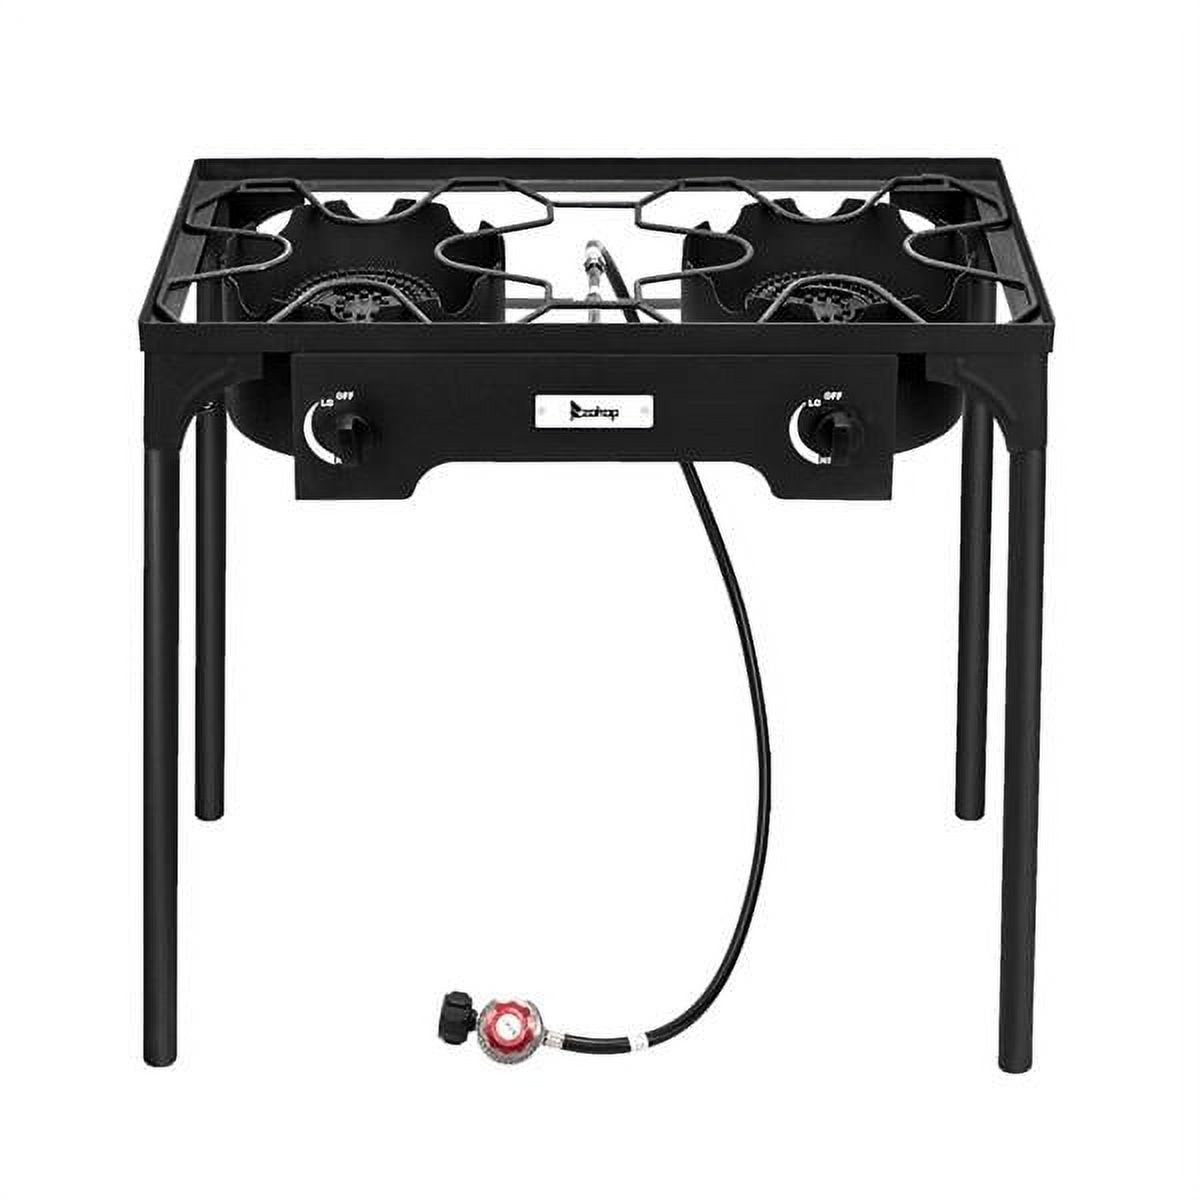 2 Burner Camp Stove, Outdoor Portable Propane Gas Grill High Pressure 2 Burner Propane Stove with Detachable Legs for BBQ Camping Fishing Parties Hunting Backyard Home Brewing Turkey Frying - image 1 of 9